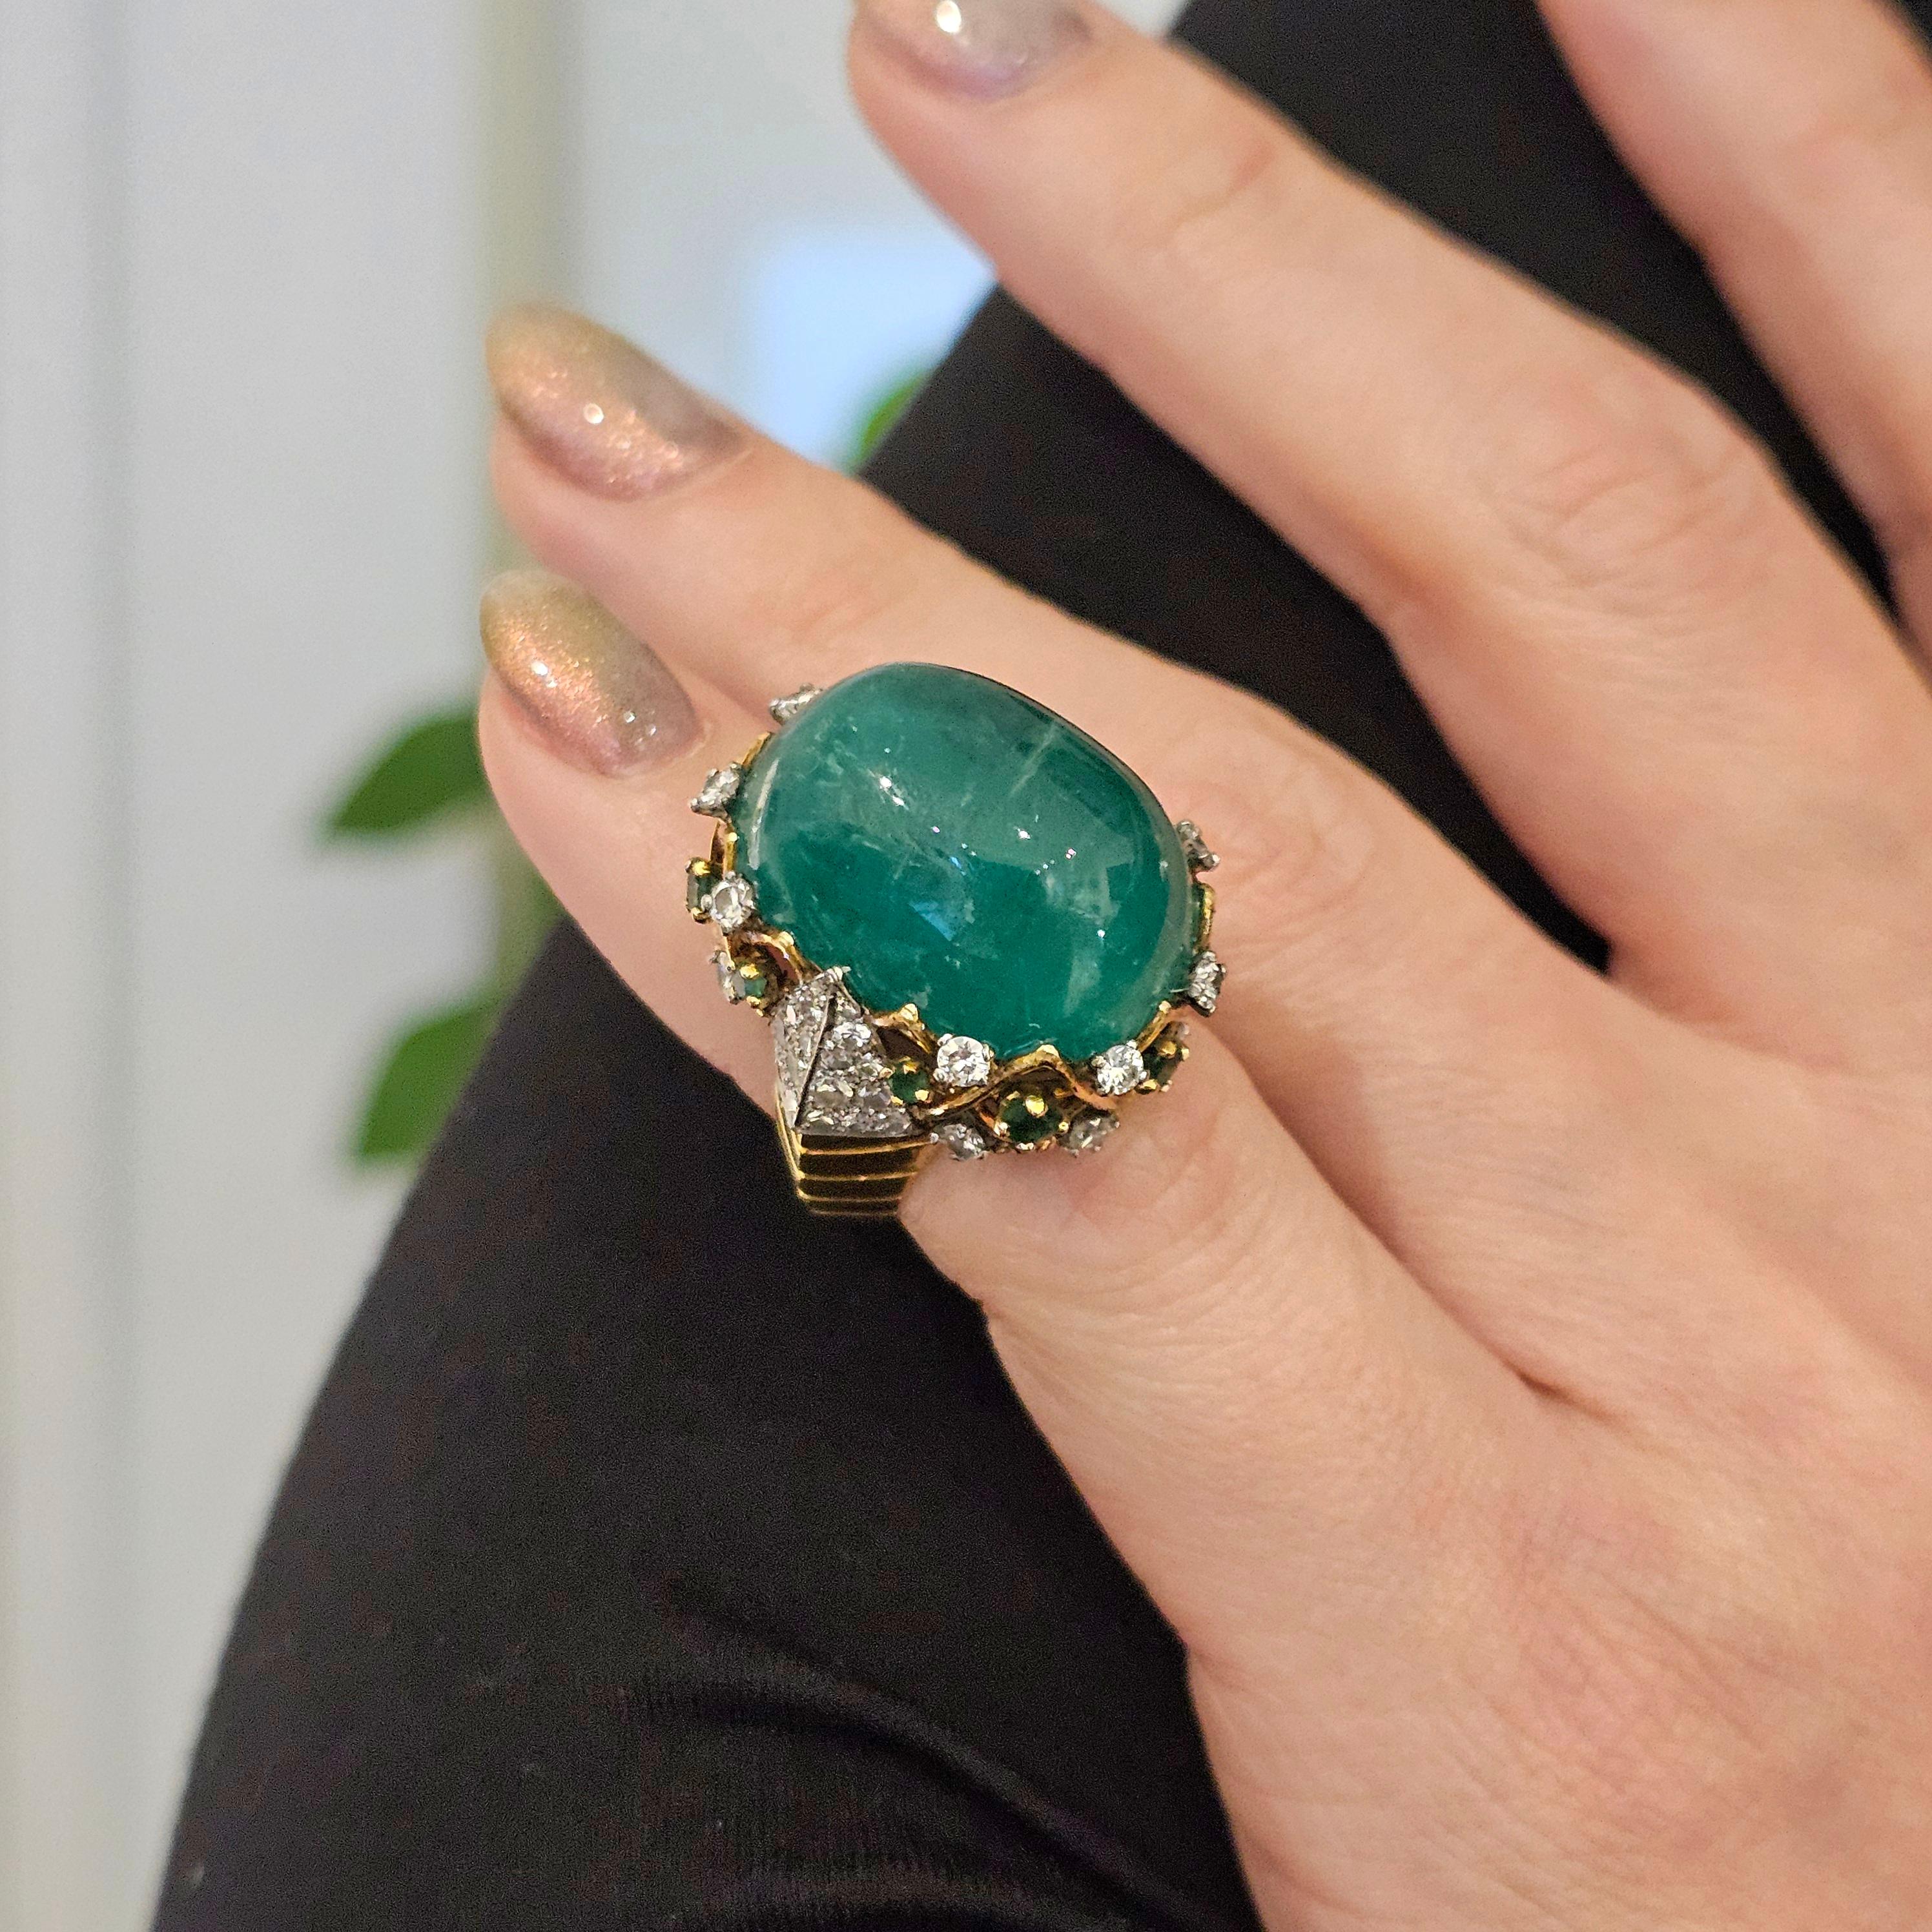 Pierre Sterlé 1950 Modernist Ring In 18Kt Gold And 43.43 Ctw Emeralds & Diamonds 3